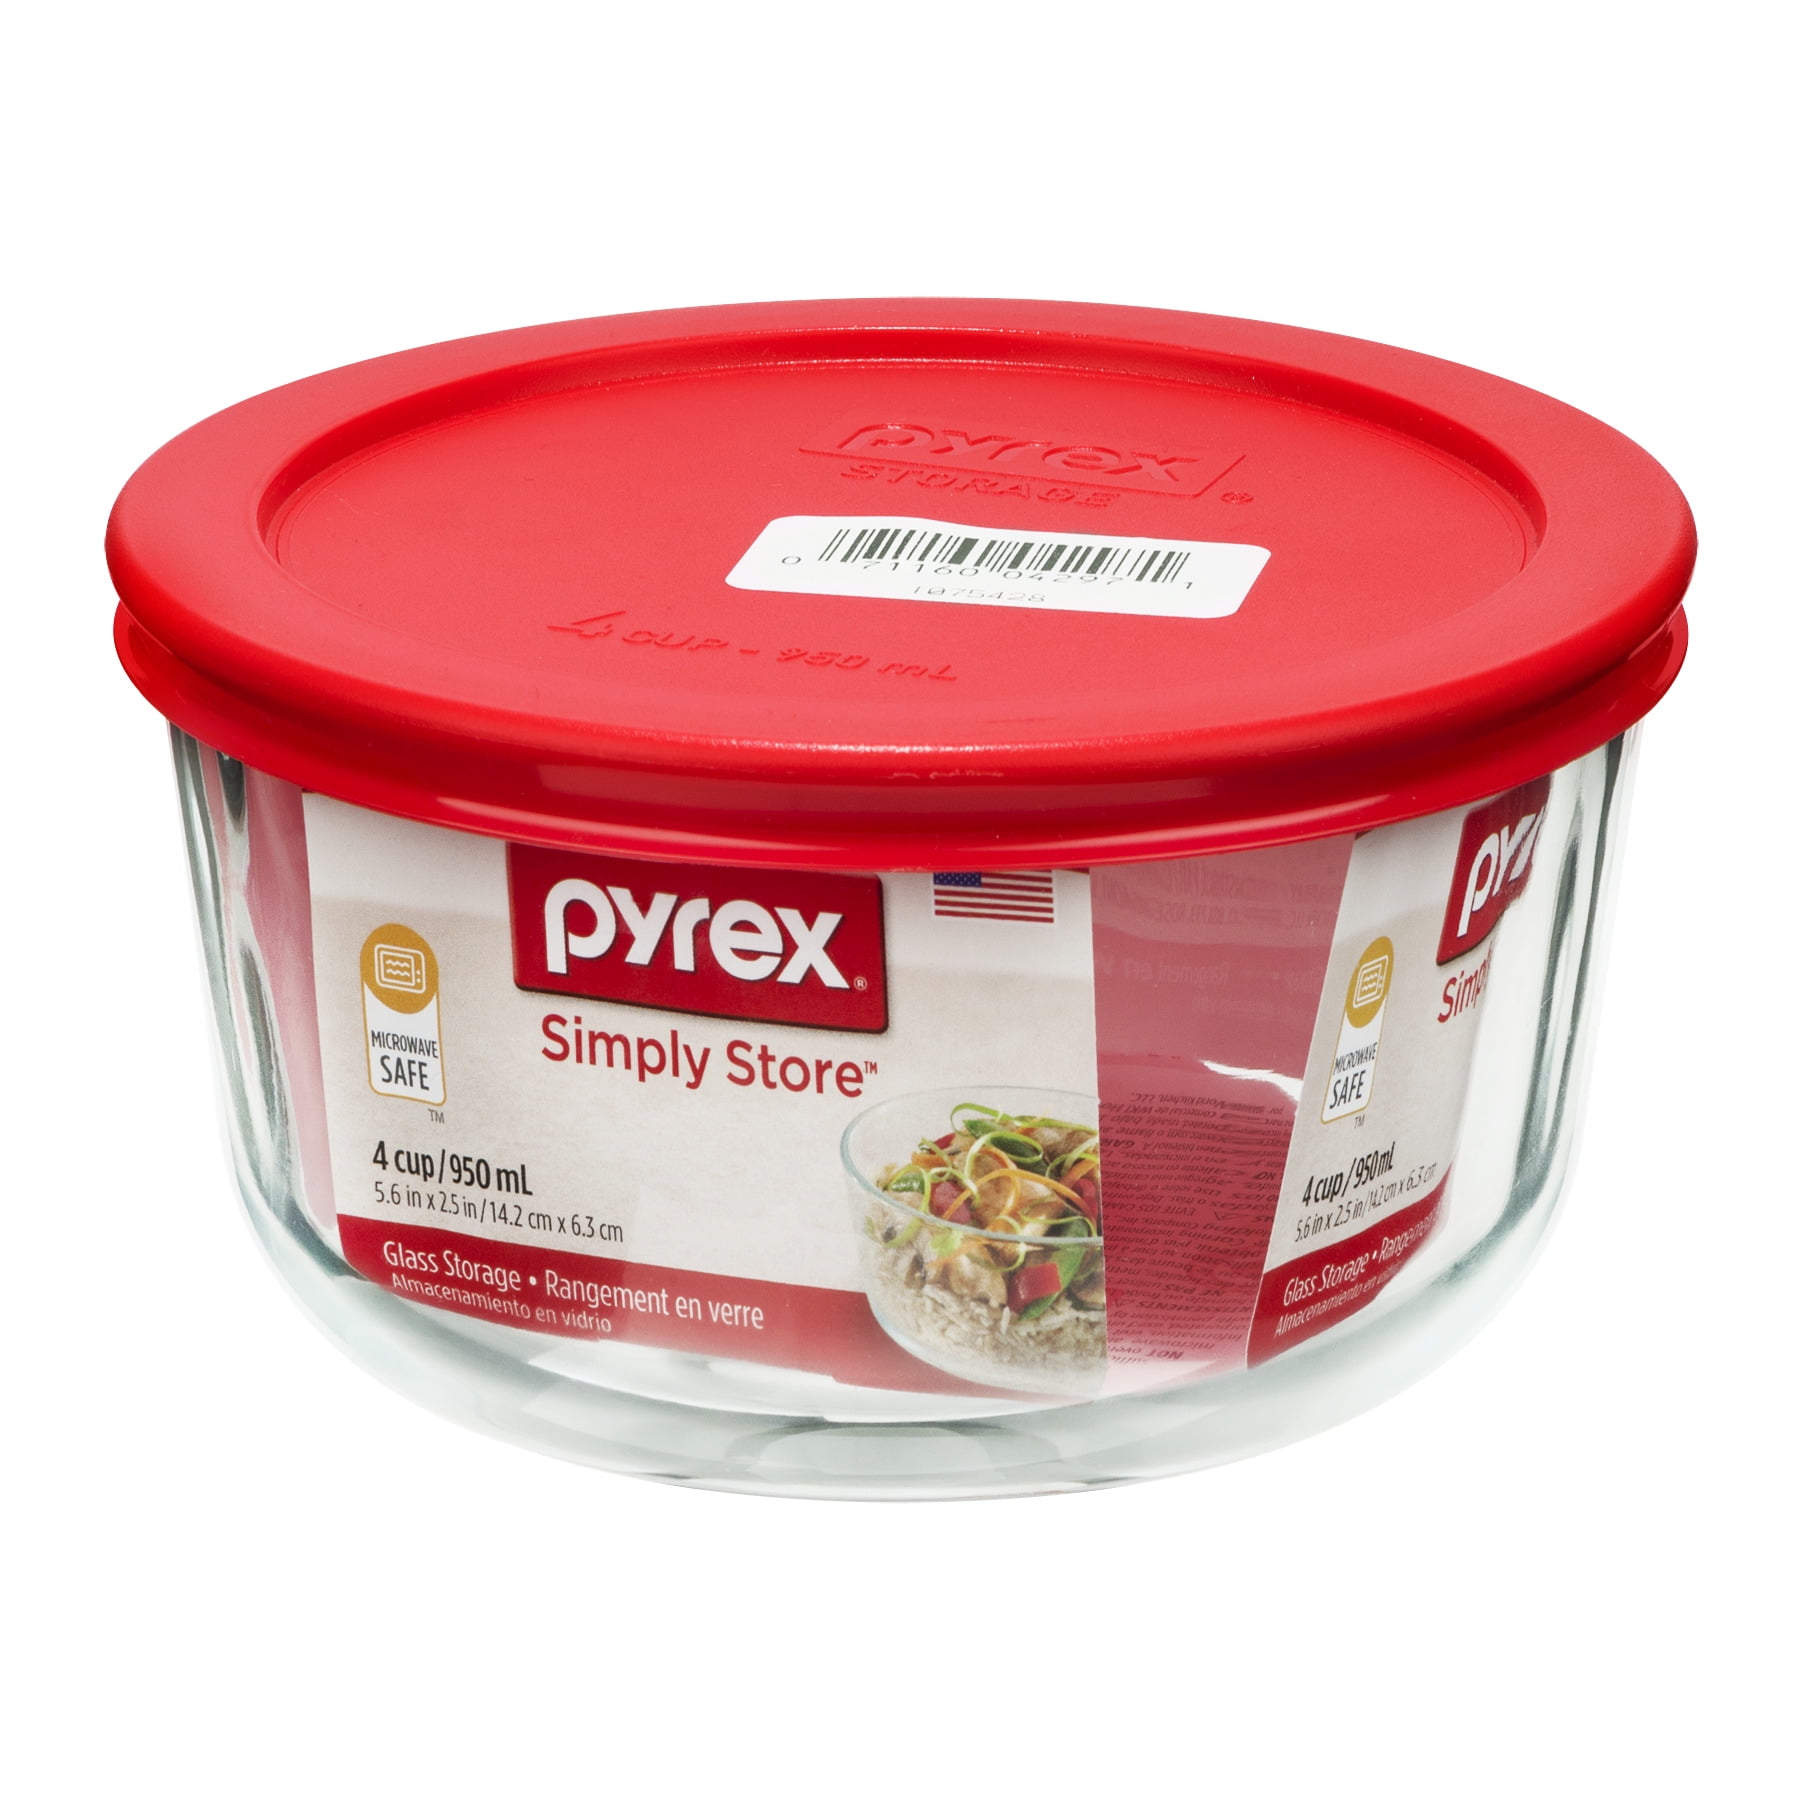 4pk Pyrex 2 Cup Glass Food Storage Containers with Airtight Lids, Clear  with Patters, Microwave Safe 